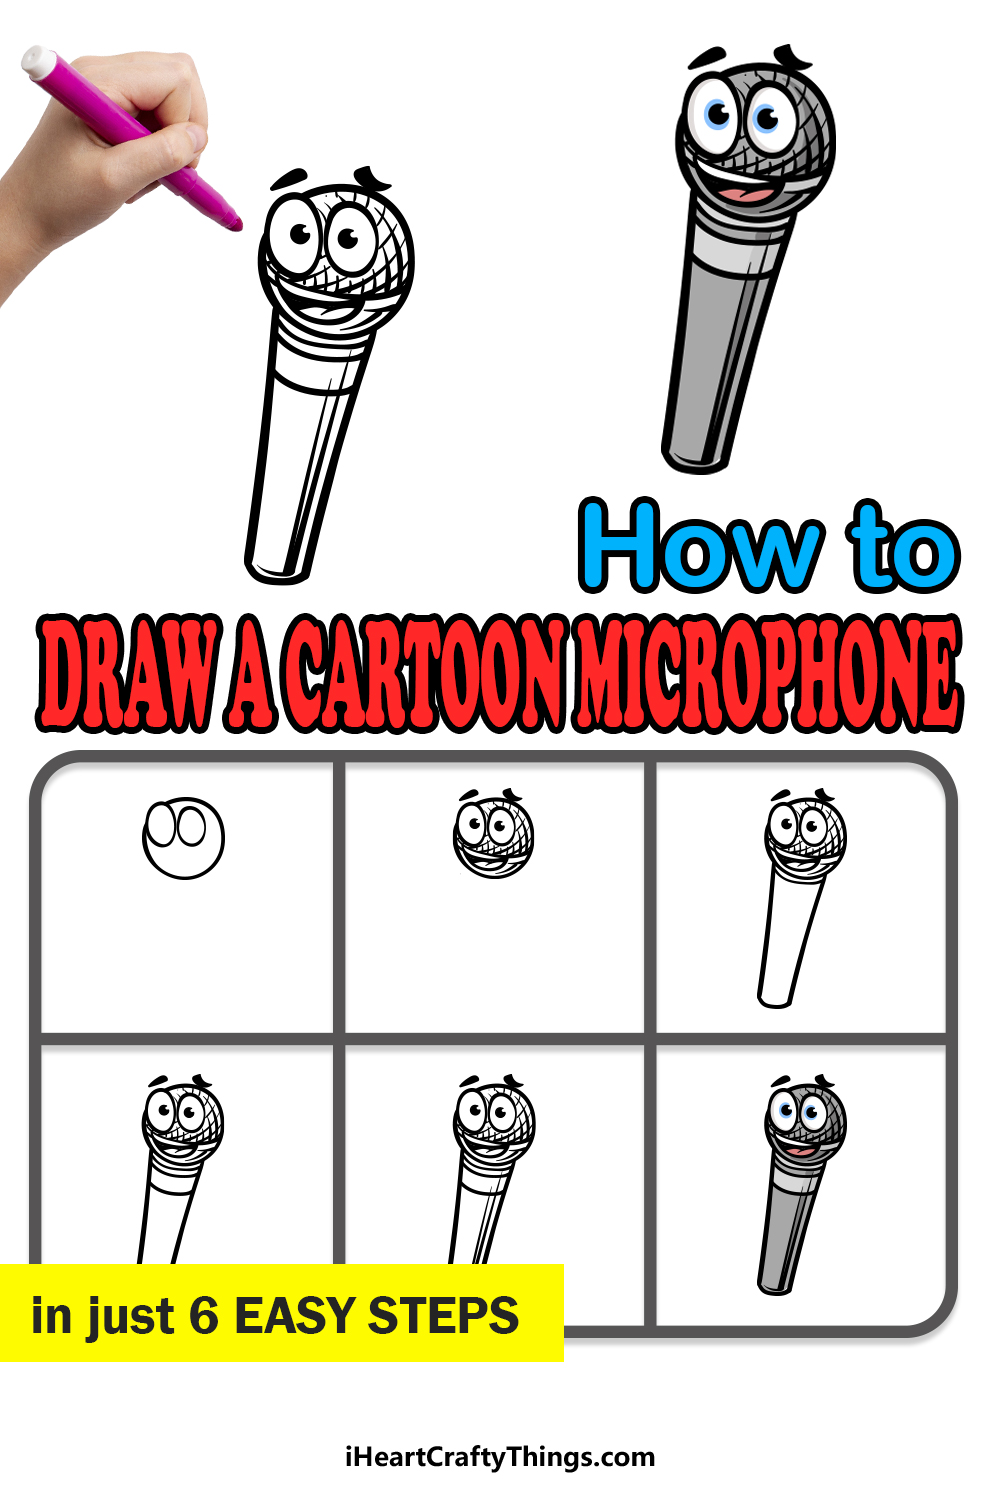 how to draw a cartoon microphone in 6 easy steps